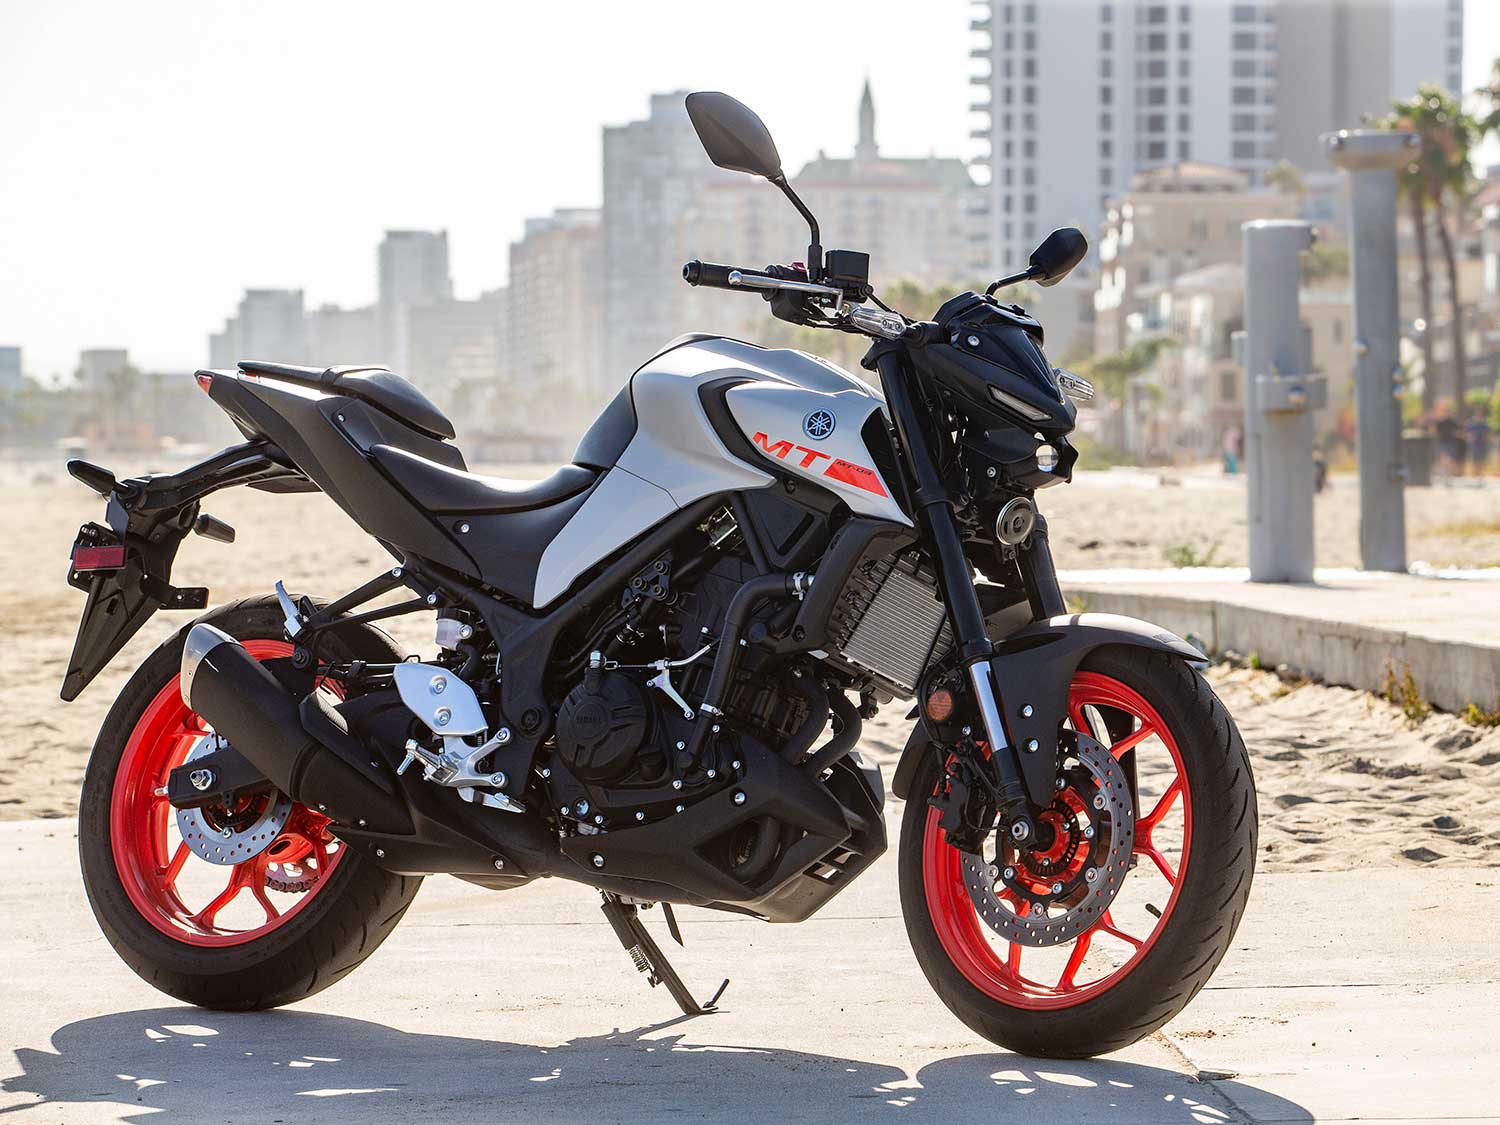 2020 Yamaha MT-03 first ride review - RevZilla